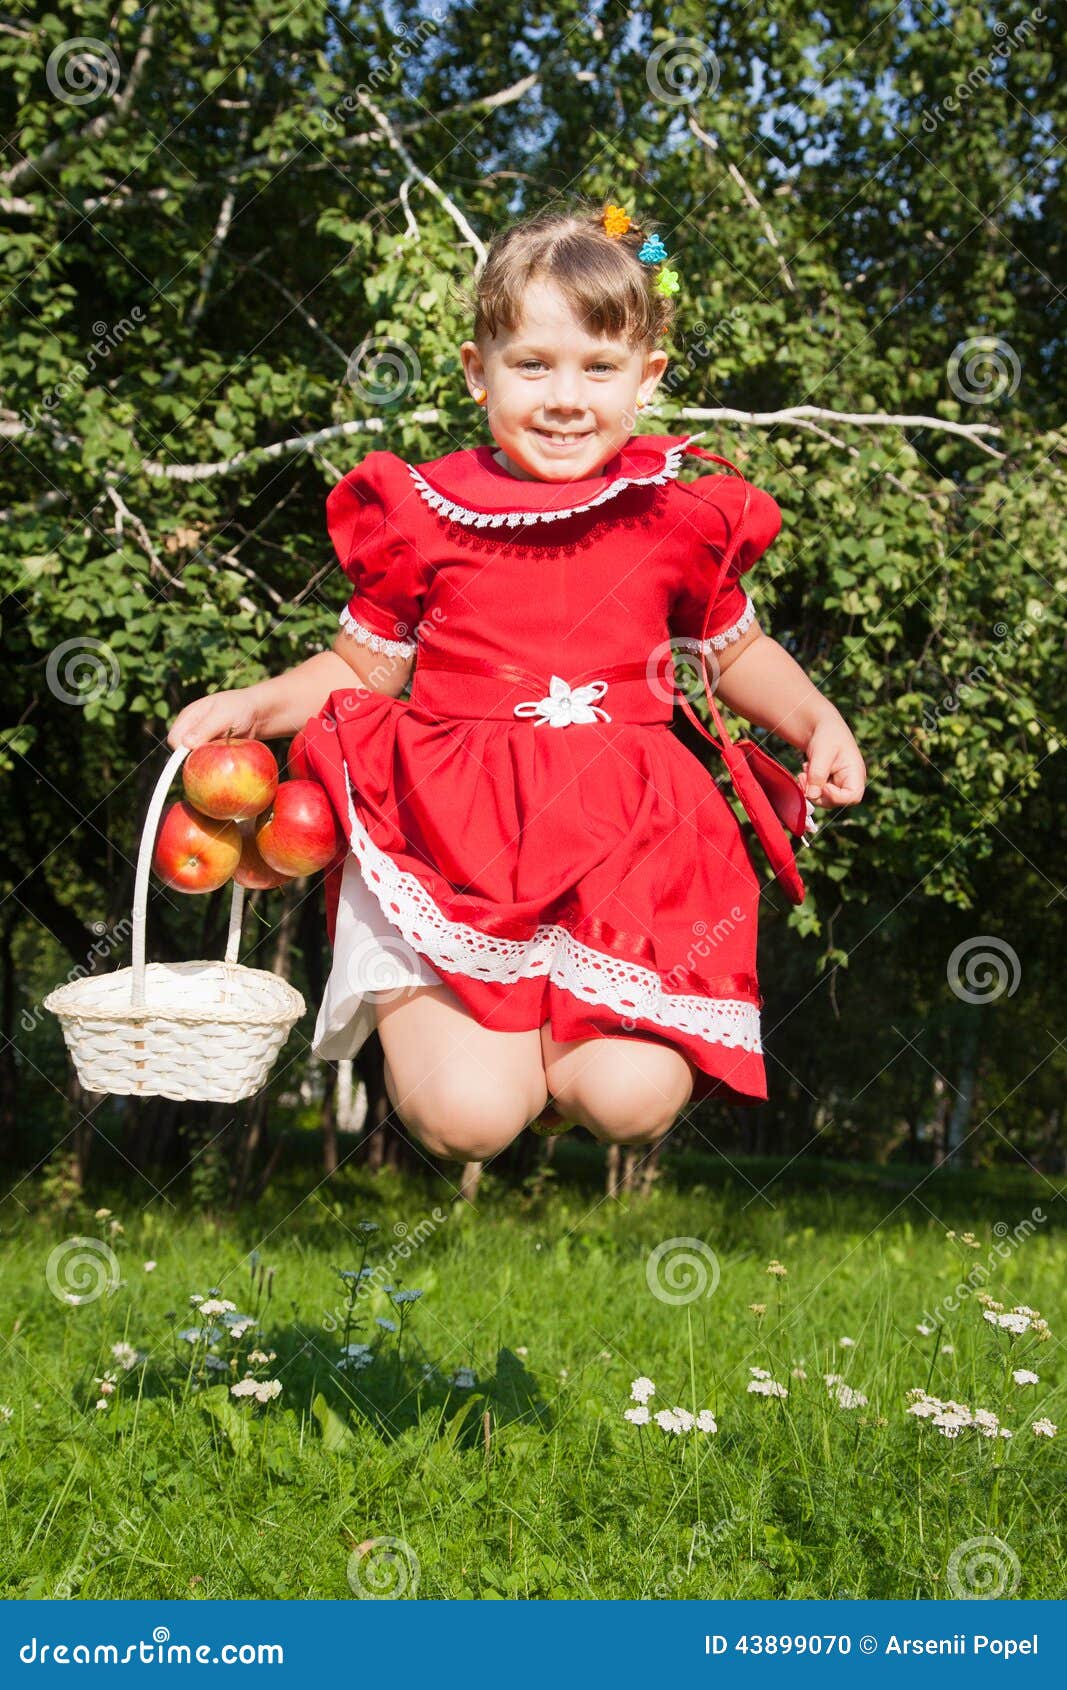 https://thumbs.dreamstime.com/z/laughing-girl-throwing-up-redapples-portrait-young-red-apples-43899070.jpg